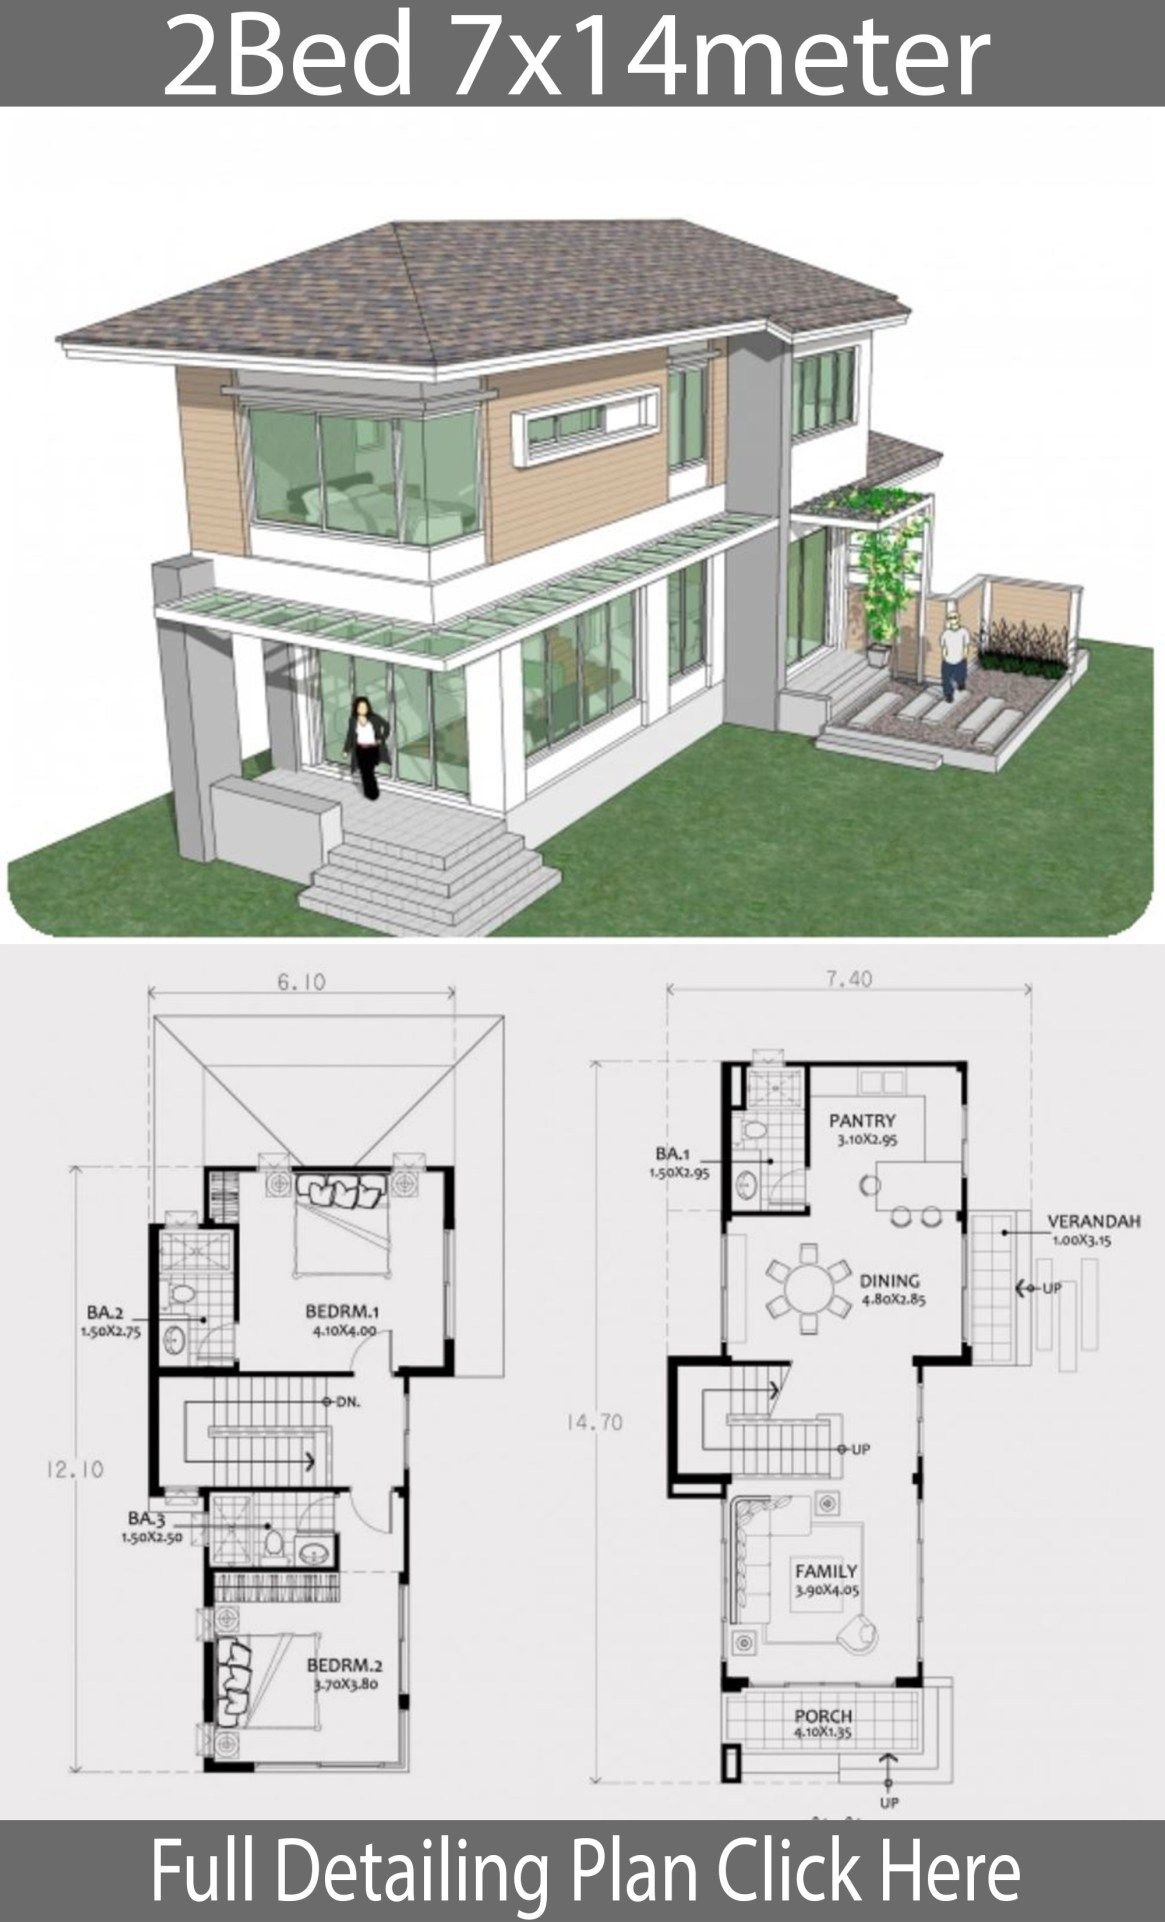 Small twostory house plan 7x14m Home Design with